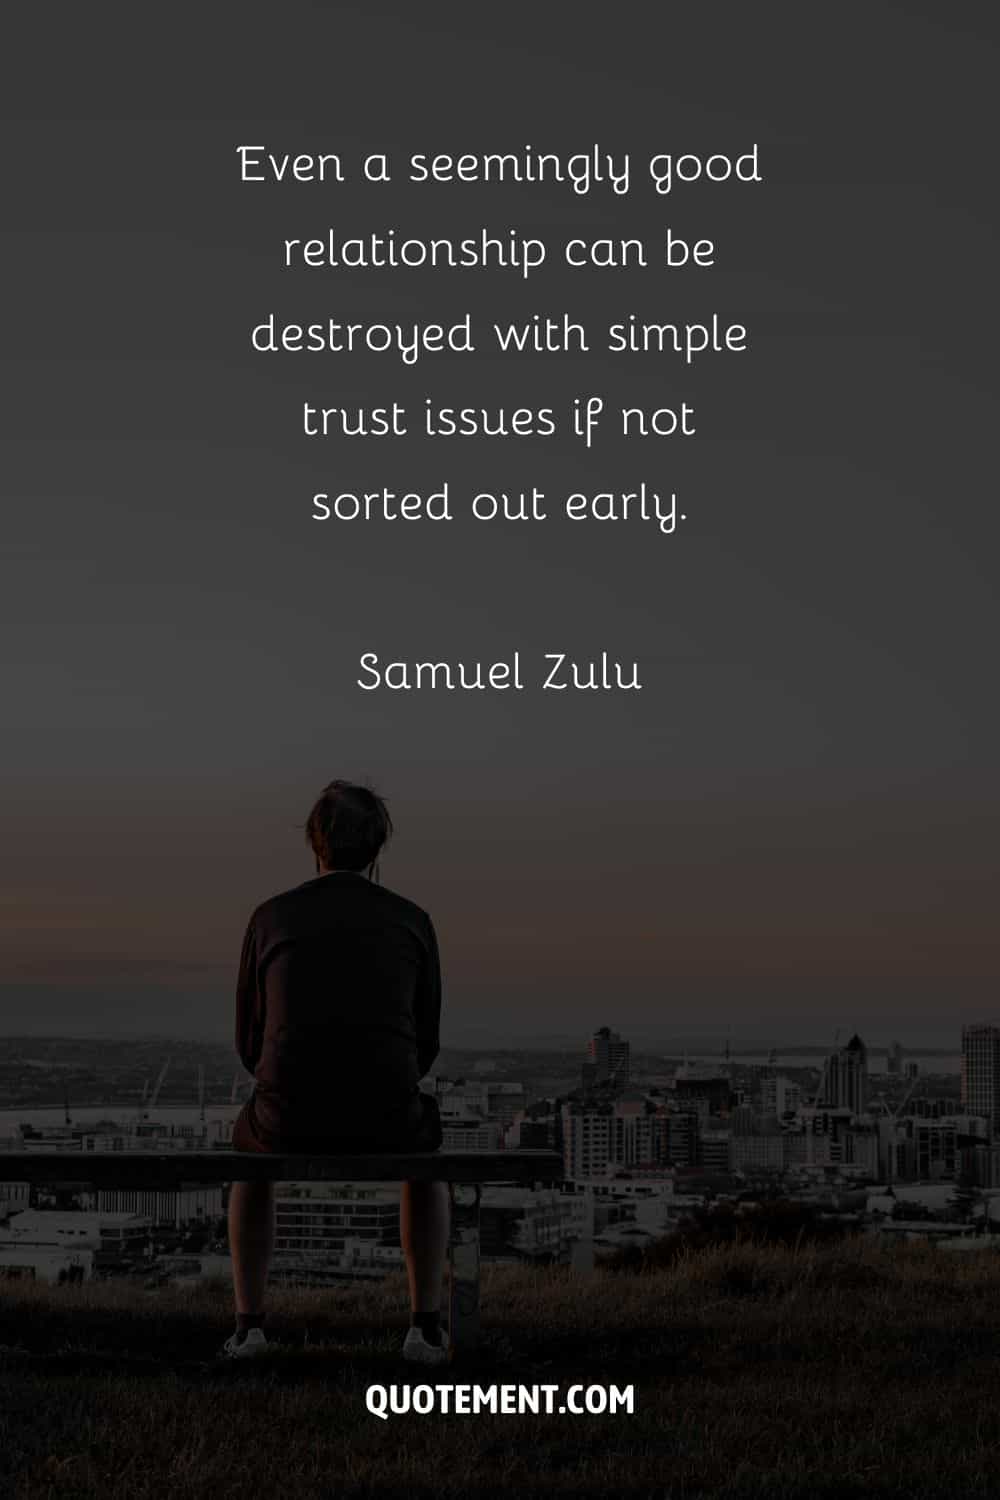 “Even a seemingly good relationship can be destroyed with simple trust issues if not sorted out early.” — Samuel Zulu